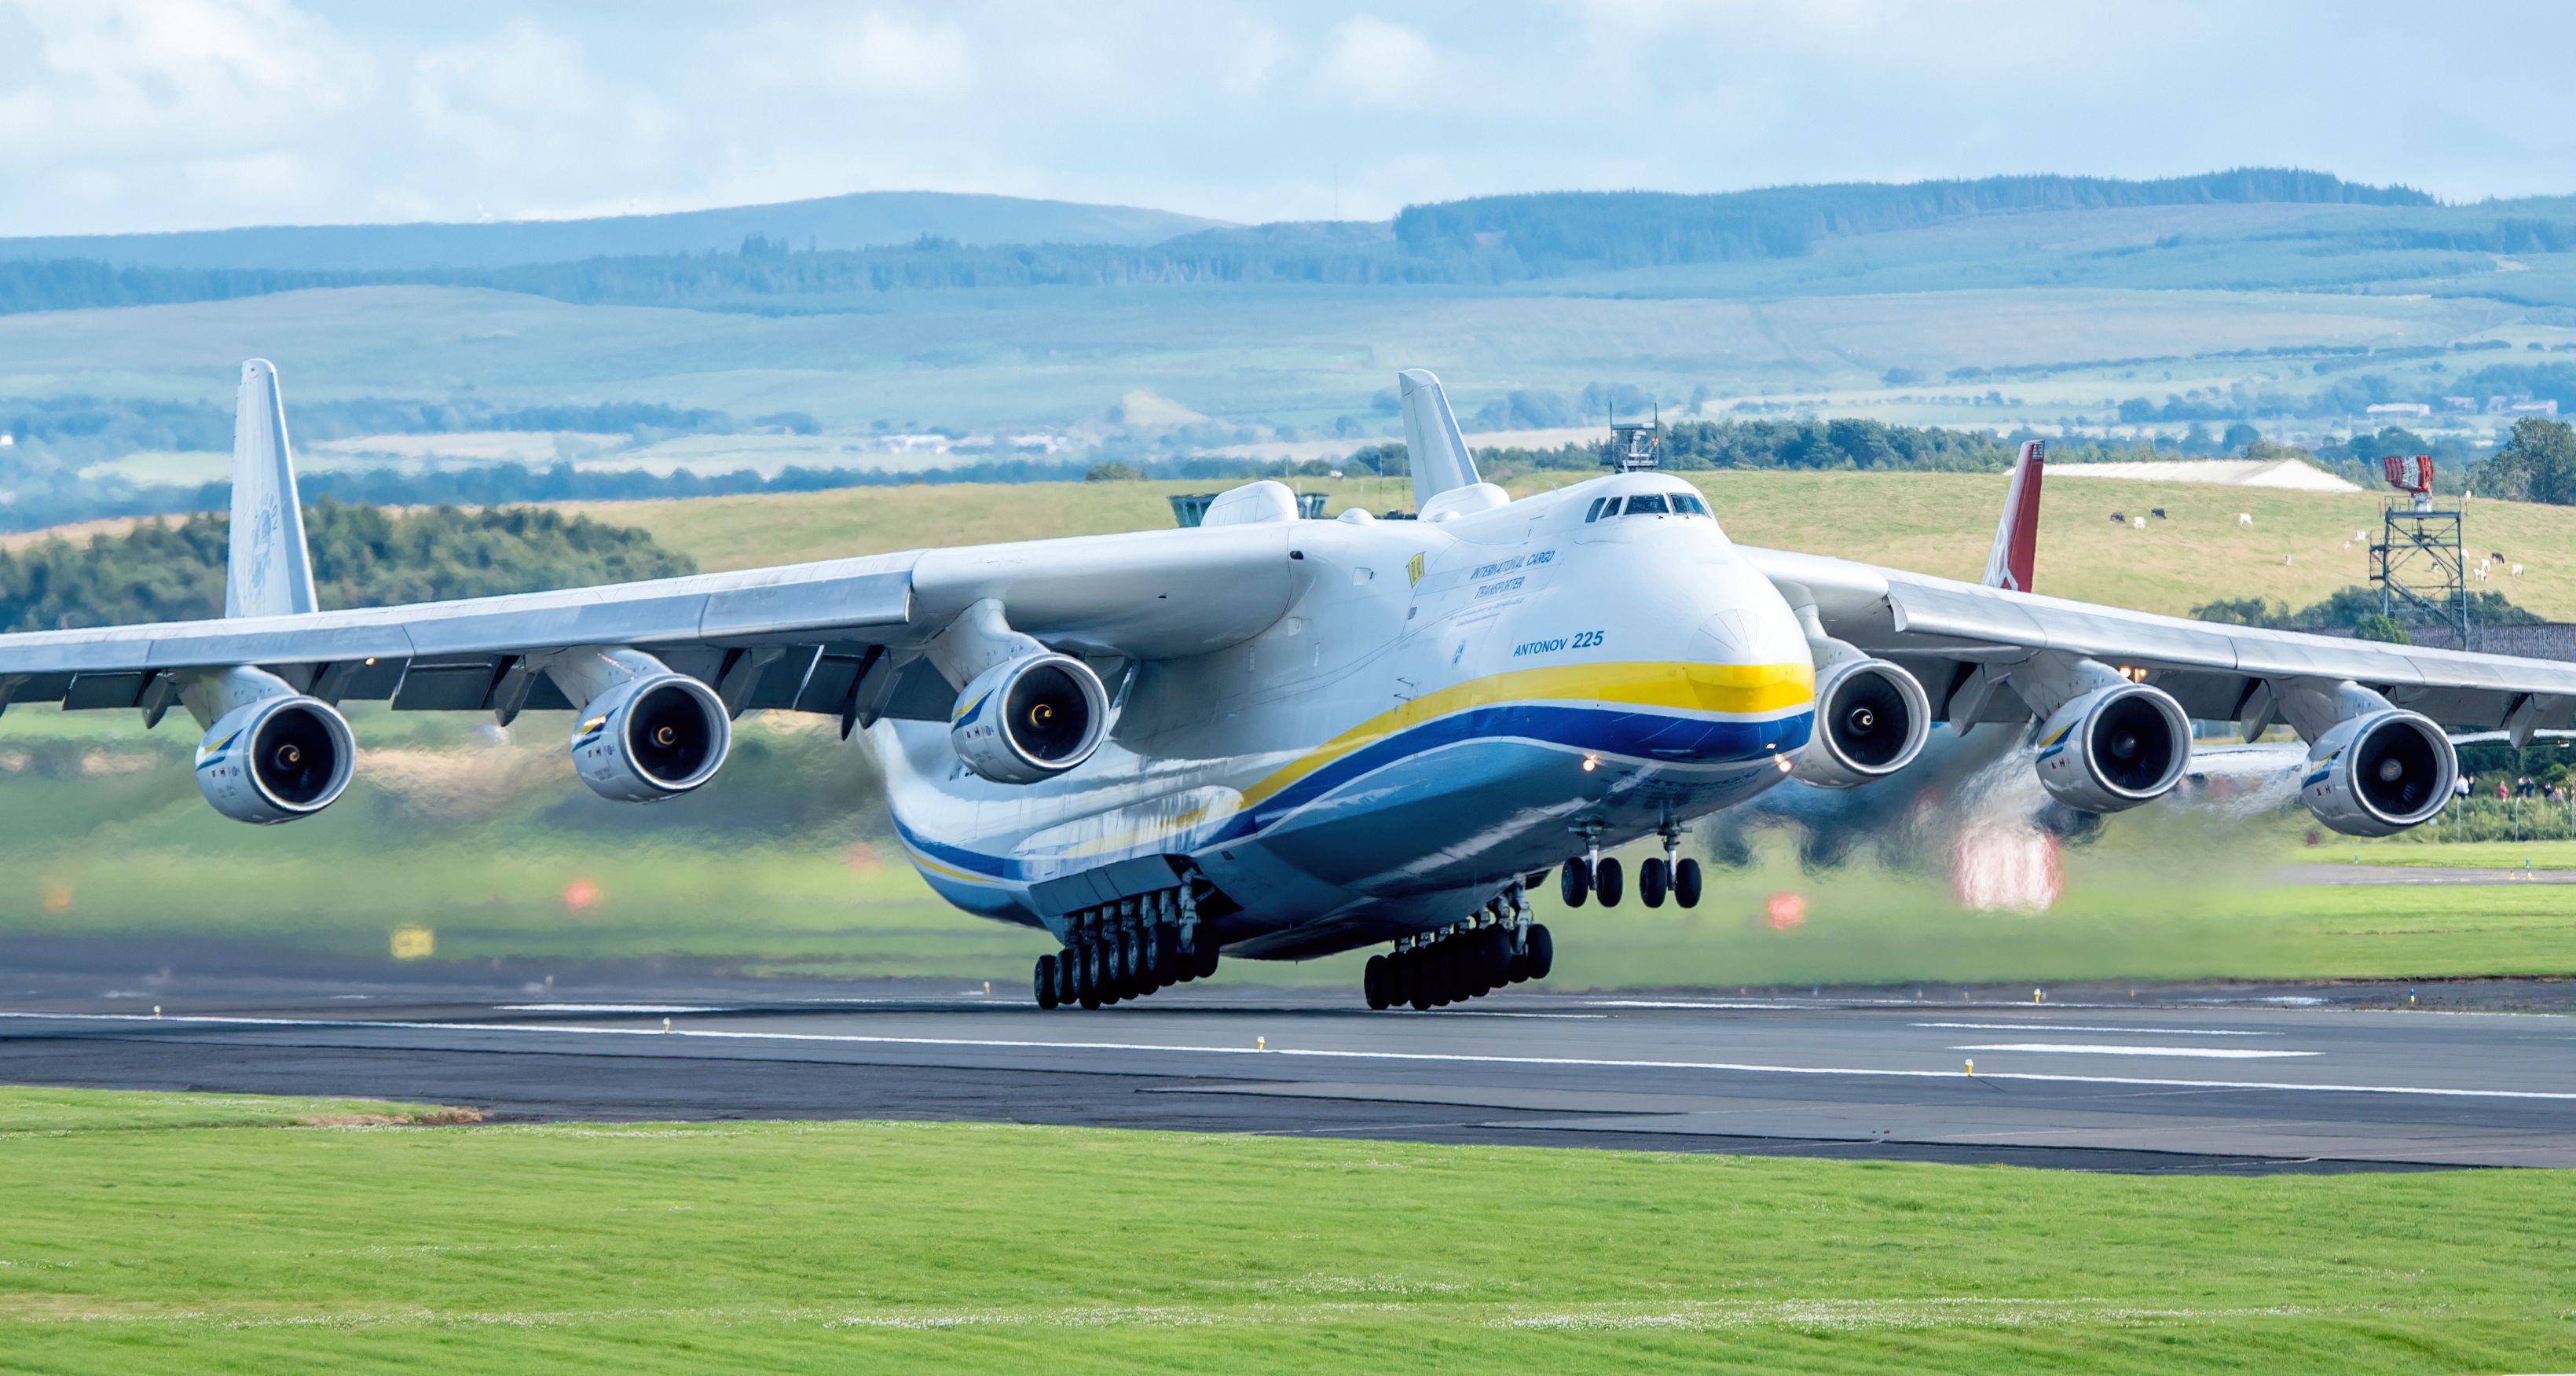 The Antonov An-225, taking off from a runway.